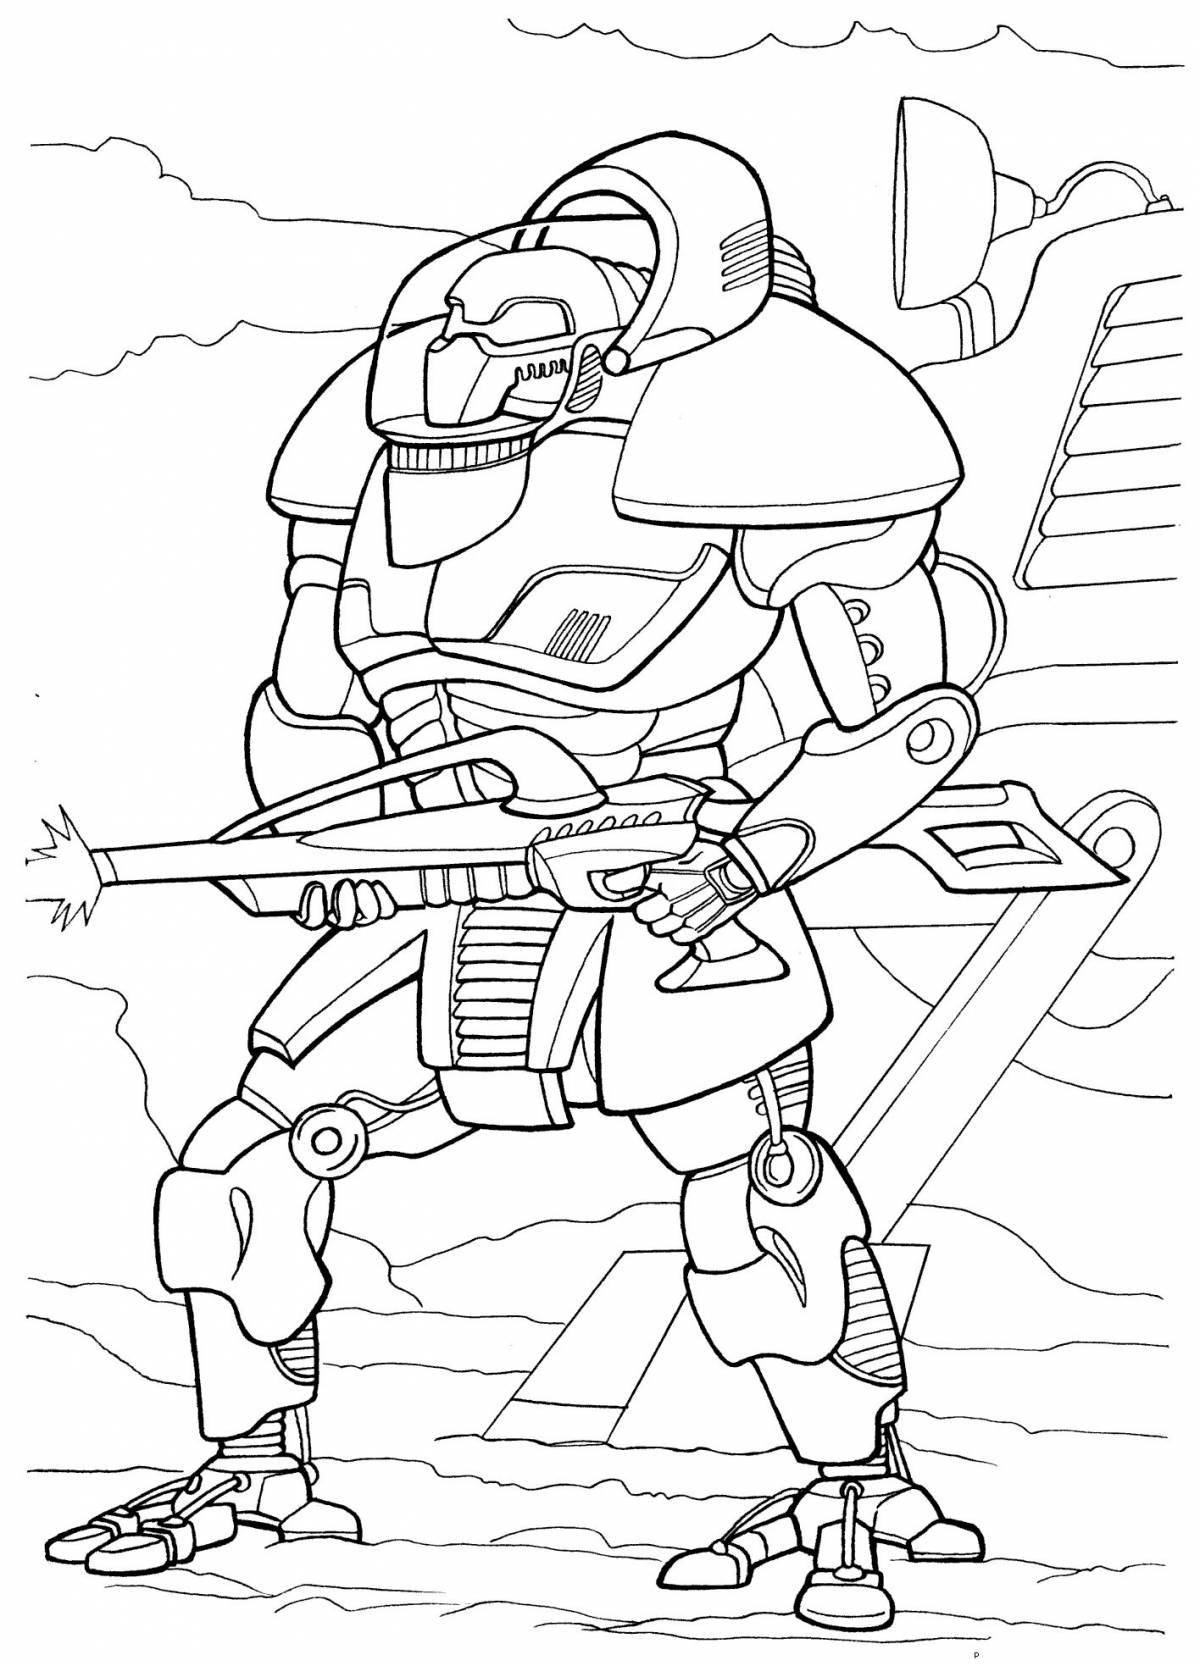 Amazing robot coloring pages for boys 6-7 years old